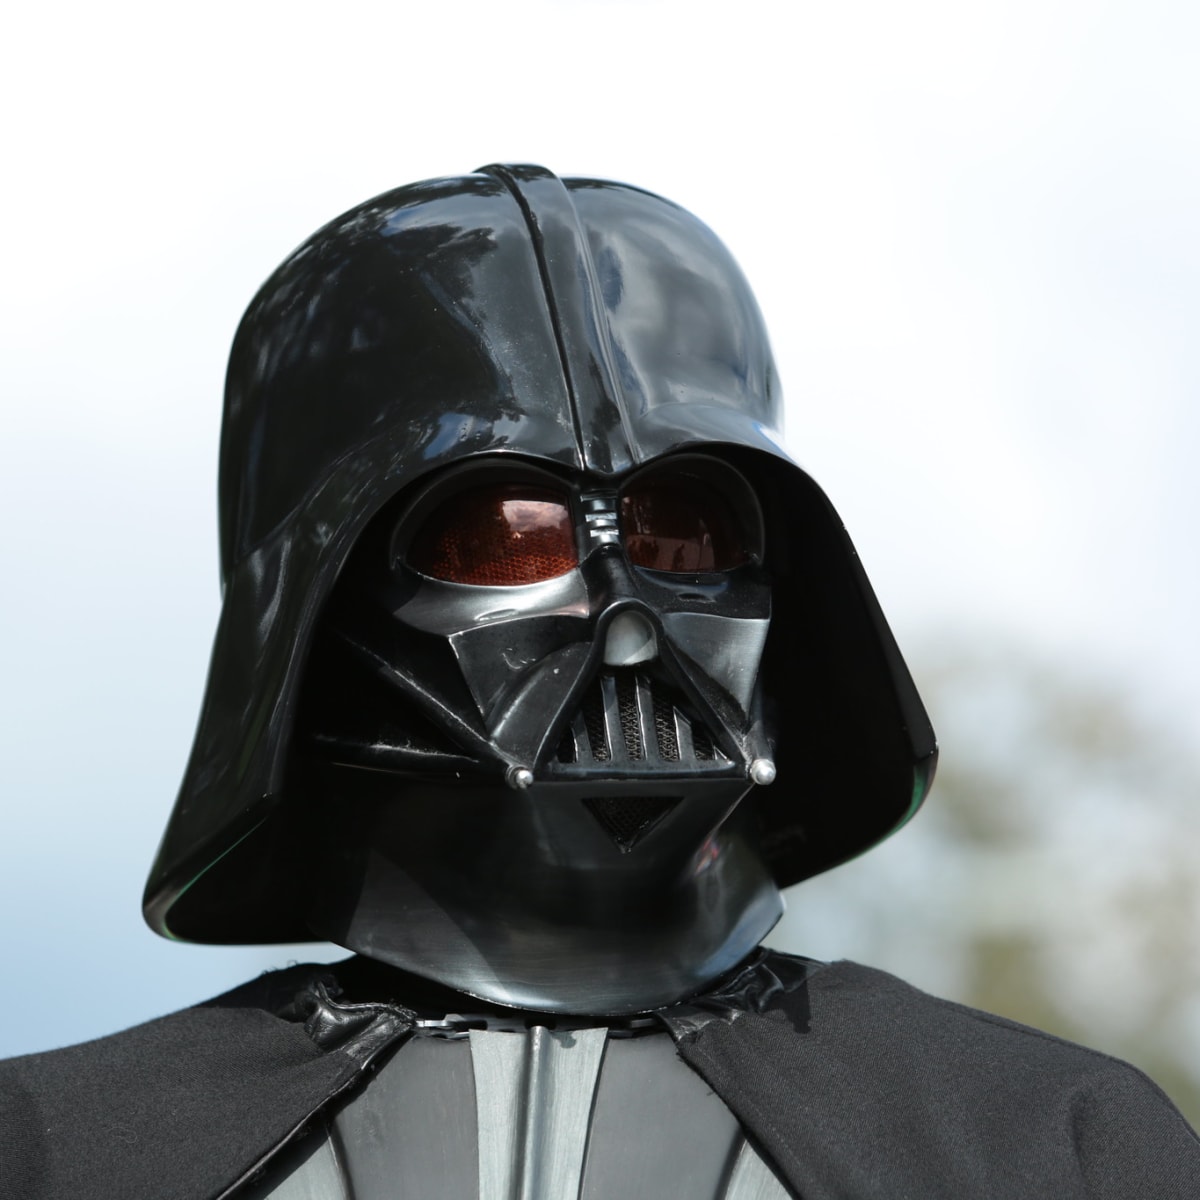 Star Wars': George Lucas Banned Darth Vader Actor David Prowse For